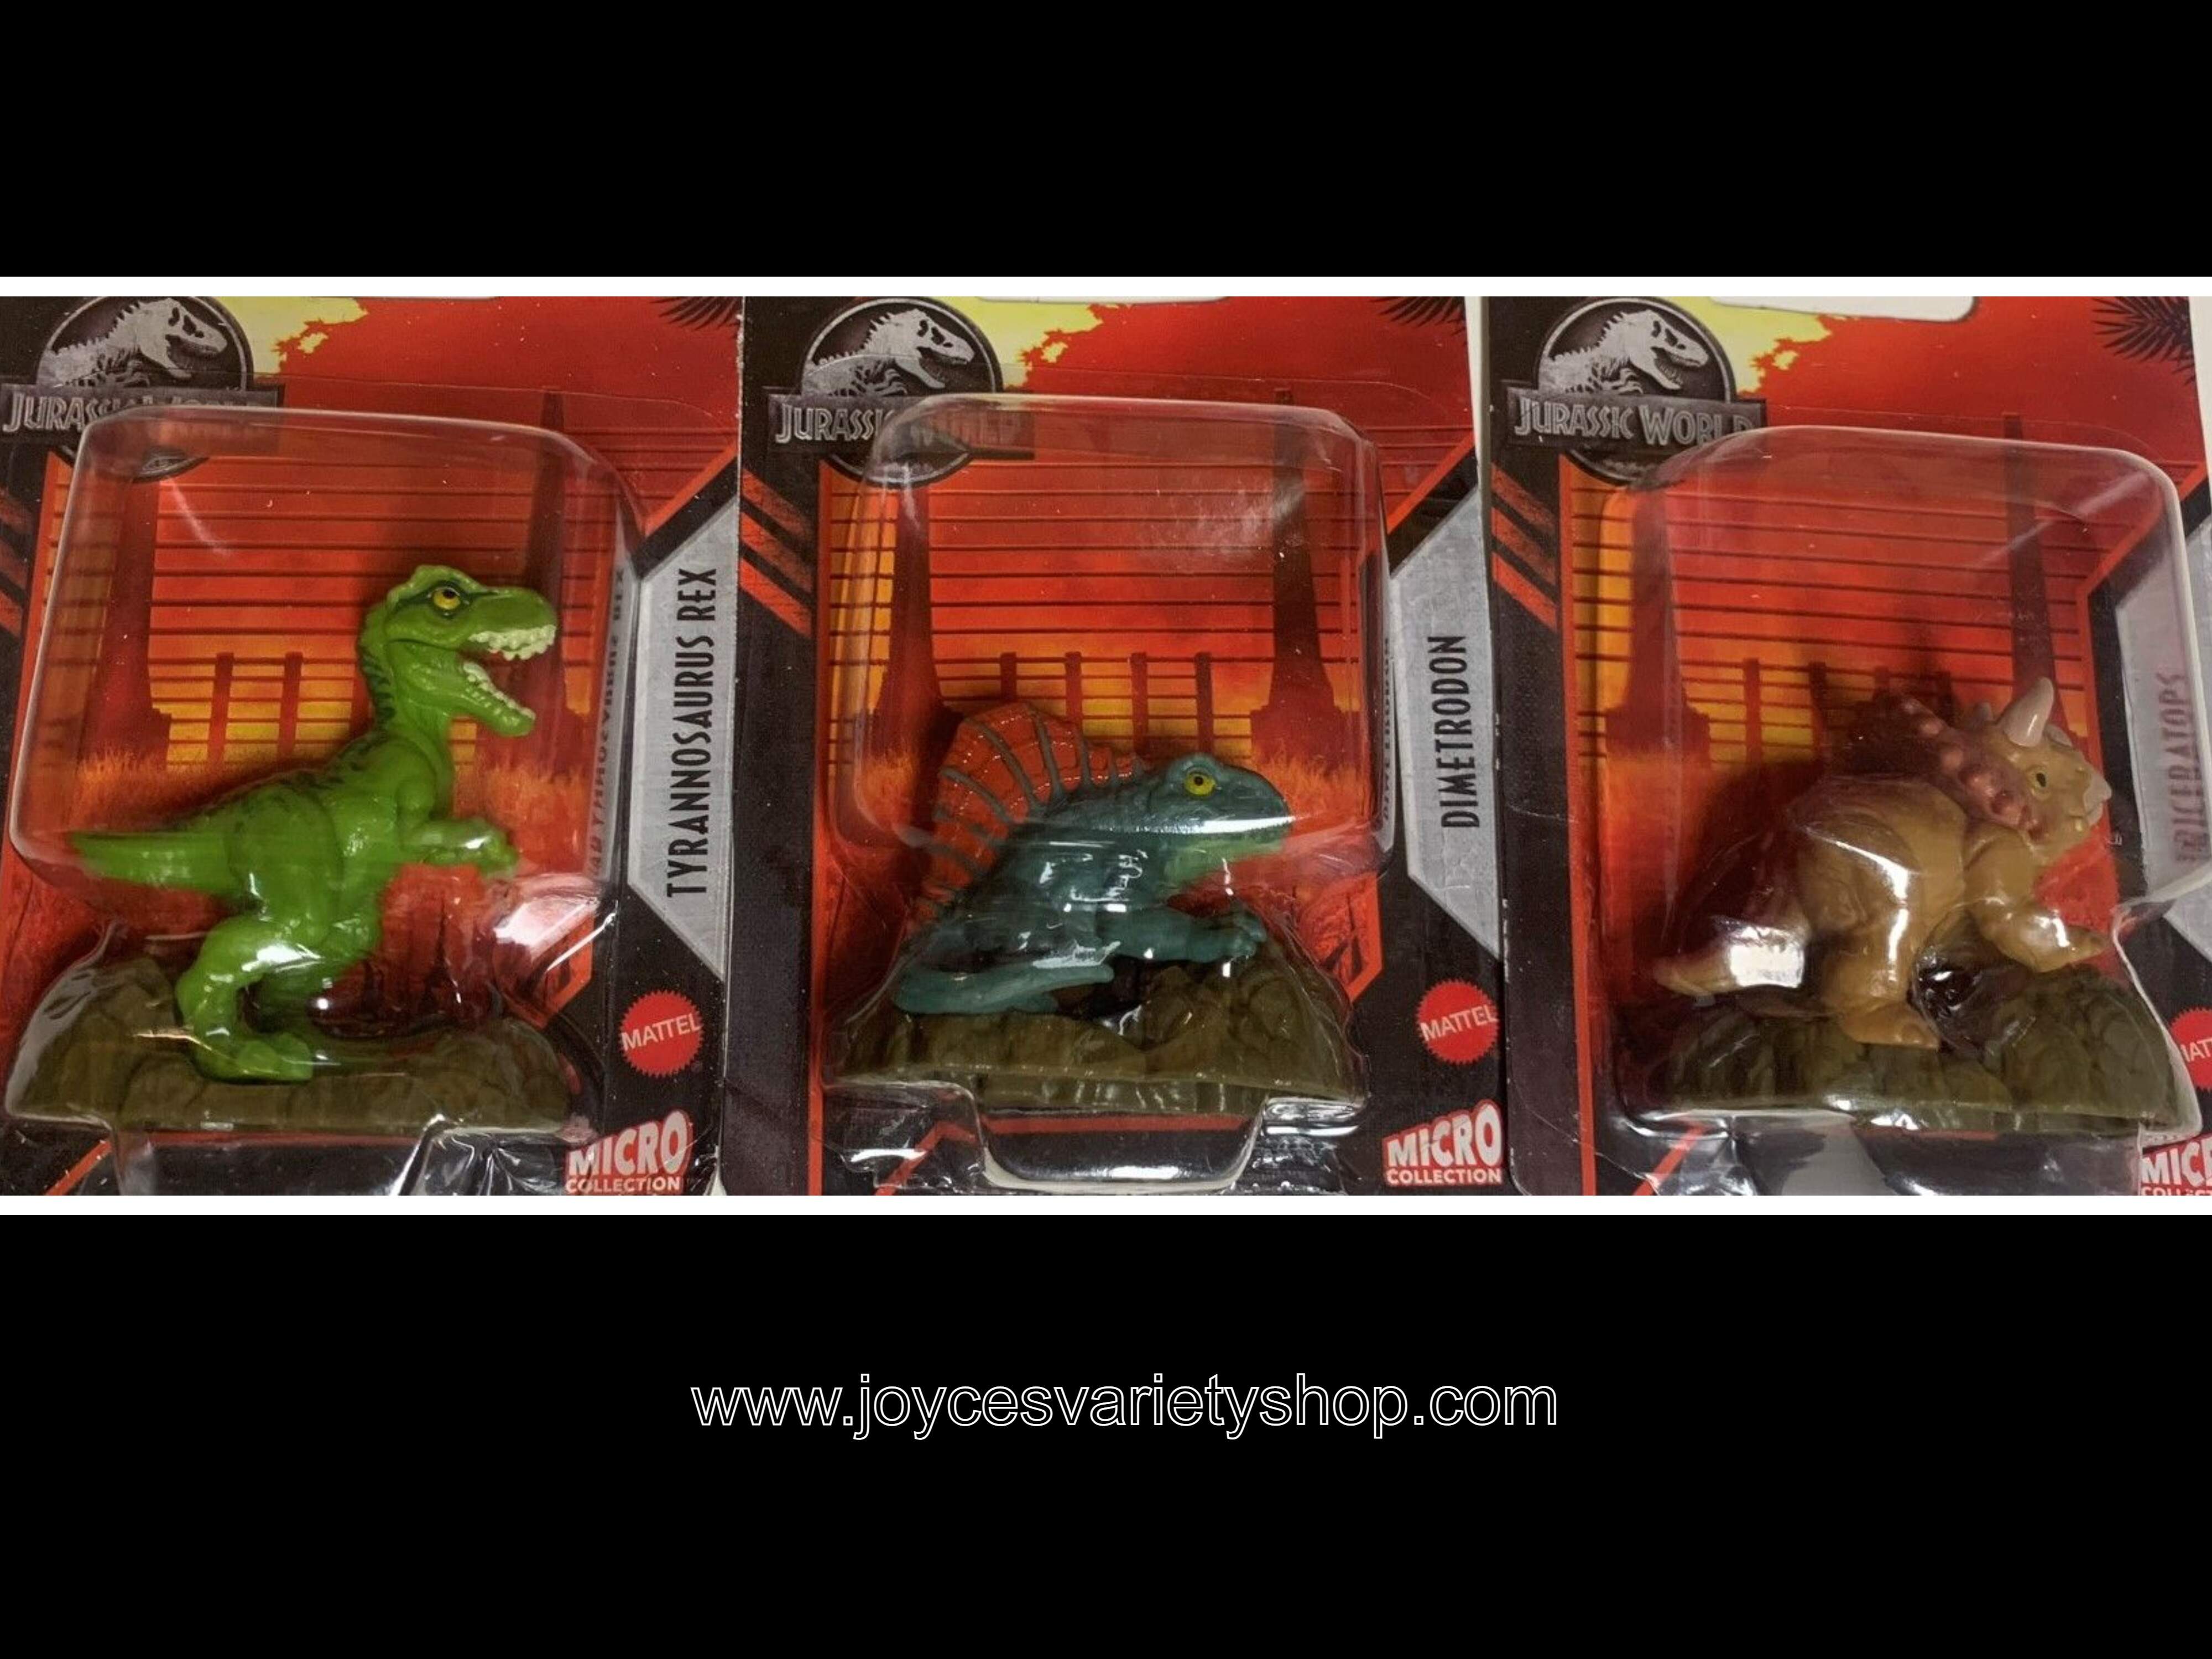 Jurassic World Movie Characters Micro Collection 3 PC Dinosaur Figures